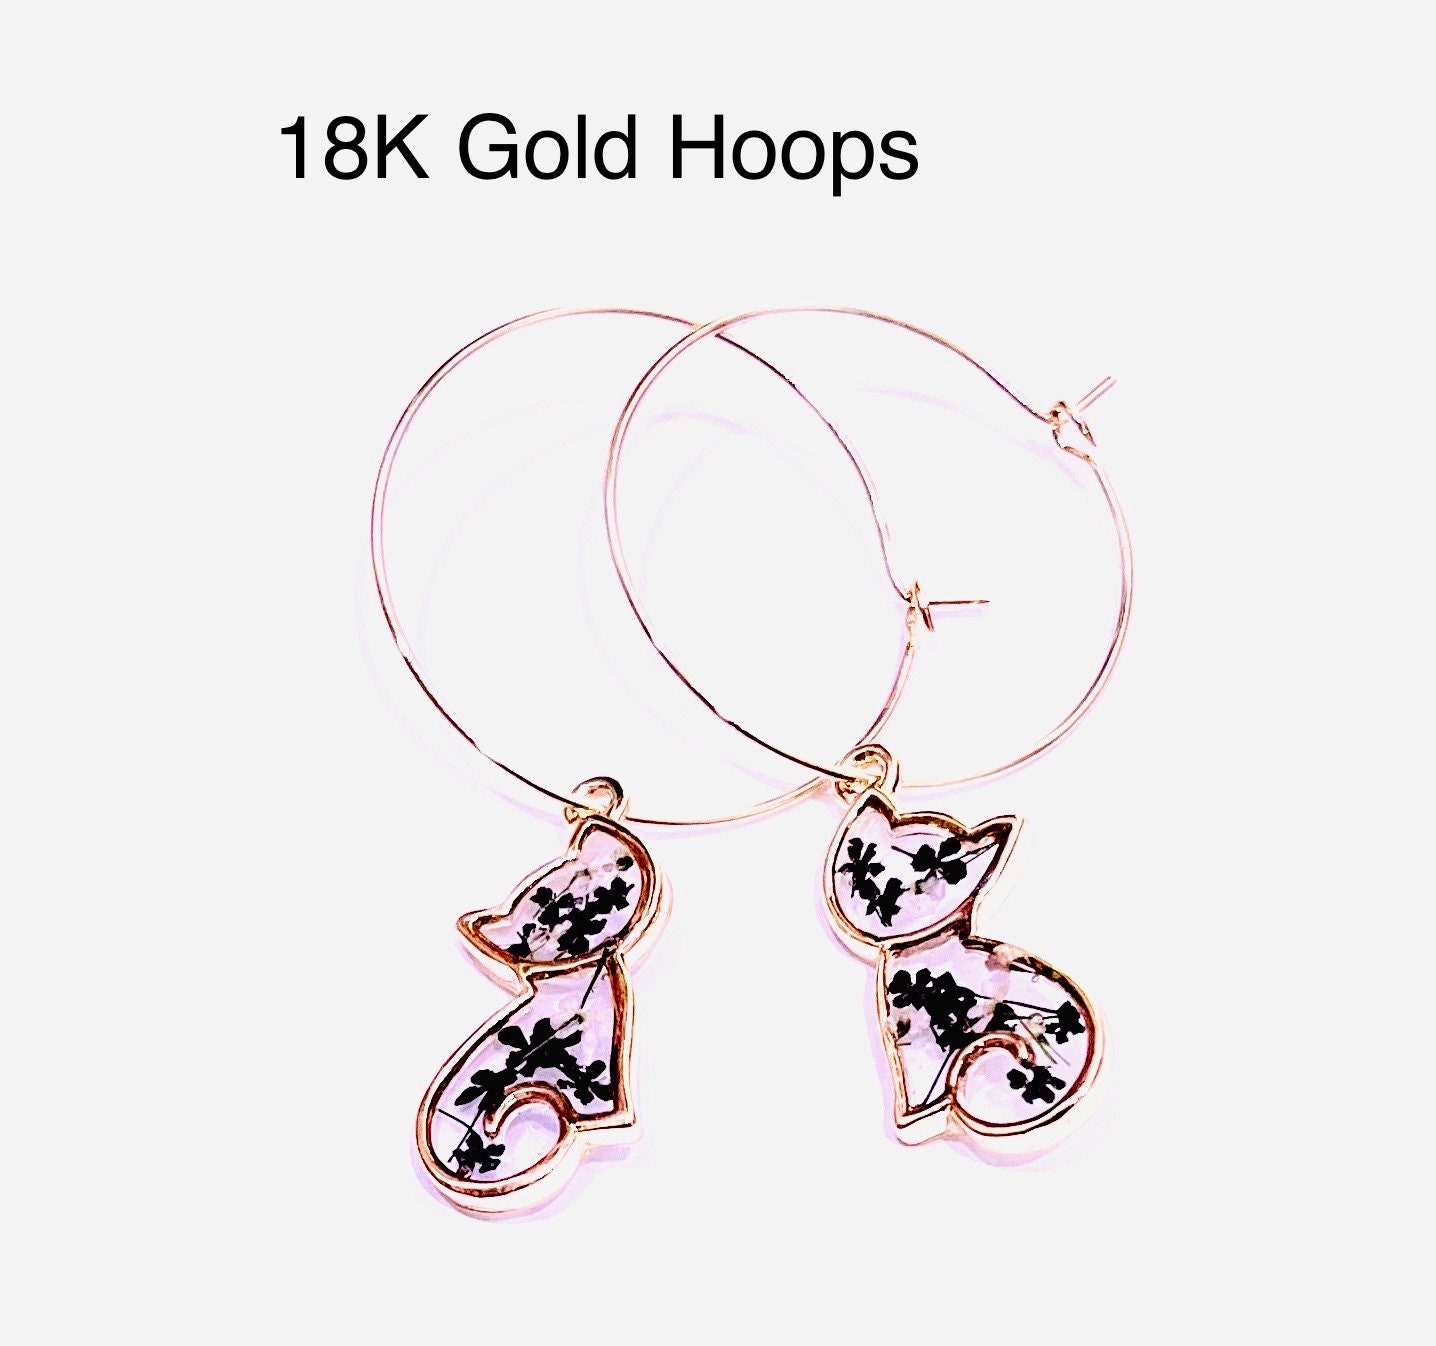 Tuxedo Cat Earrings made with Black and White Queen Anne’s lace flowers. 14K white gold plated earrings. 18K Gold Hoops. Special Gift for Cat Lovers.